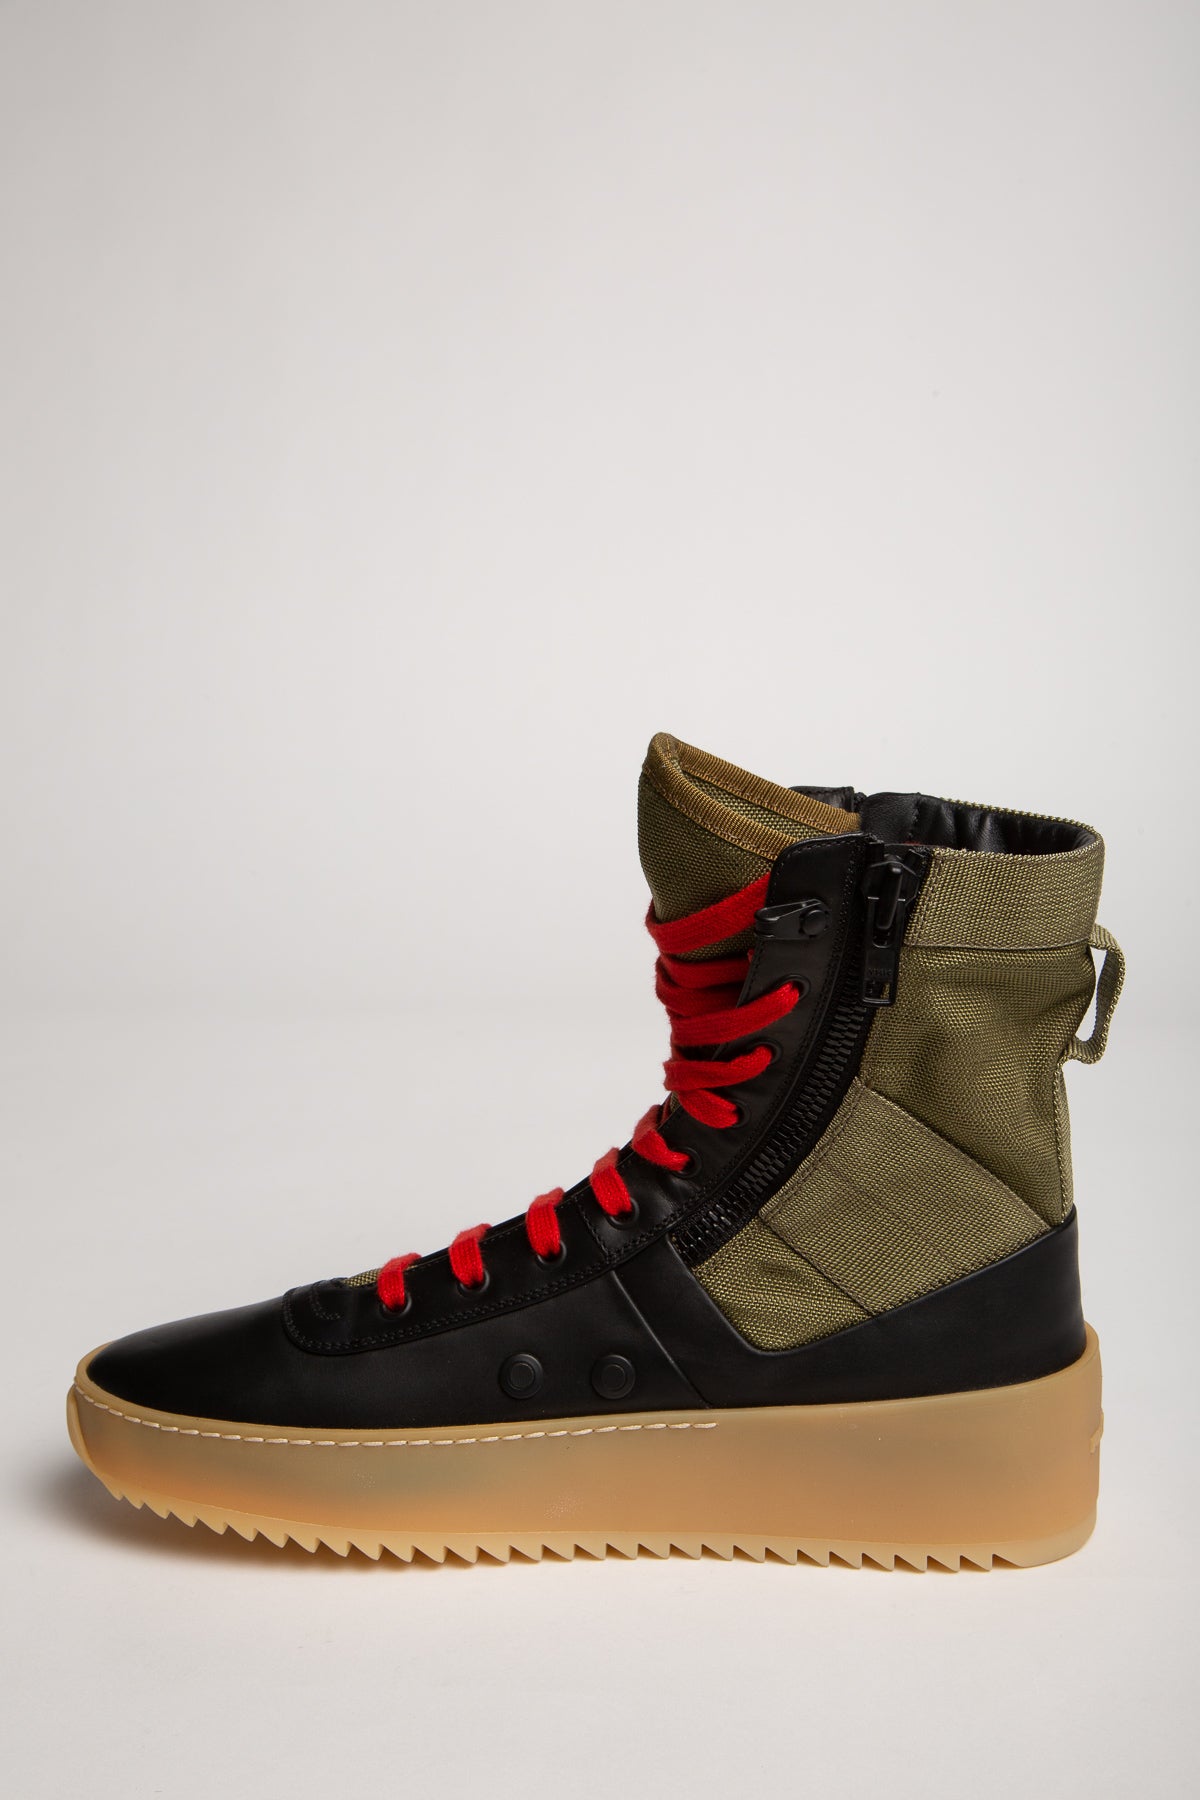 FEAR OF GOD | GRUNGE PACK JUNGLE SNEAKERS